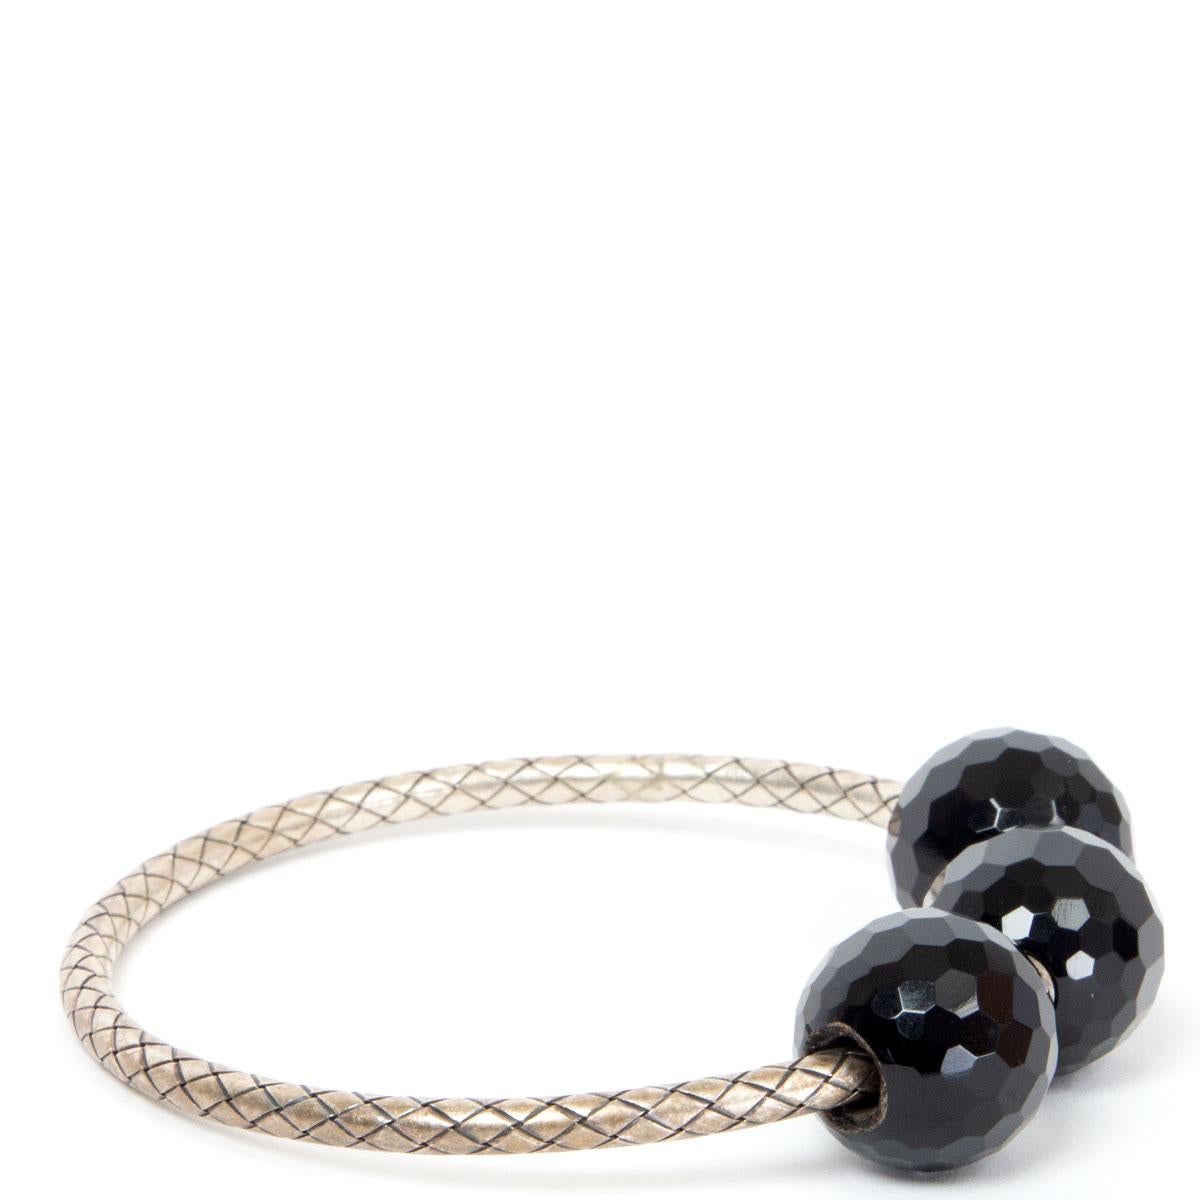 authentic Bottega Veneta Intrecciato bracelet in sterling silver embellished with three black facetted onyx balls. Has been worn and is in excellent condition. 

Circumference 19cm (7.4in)
